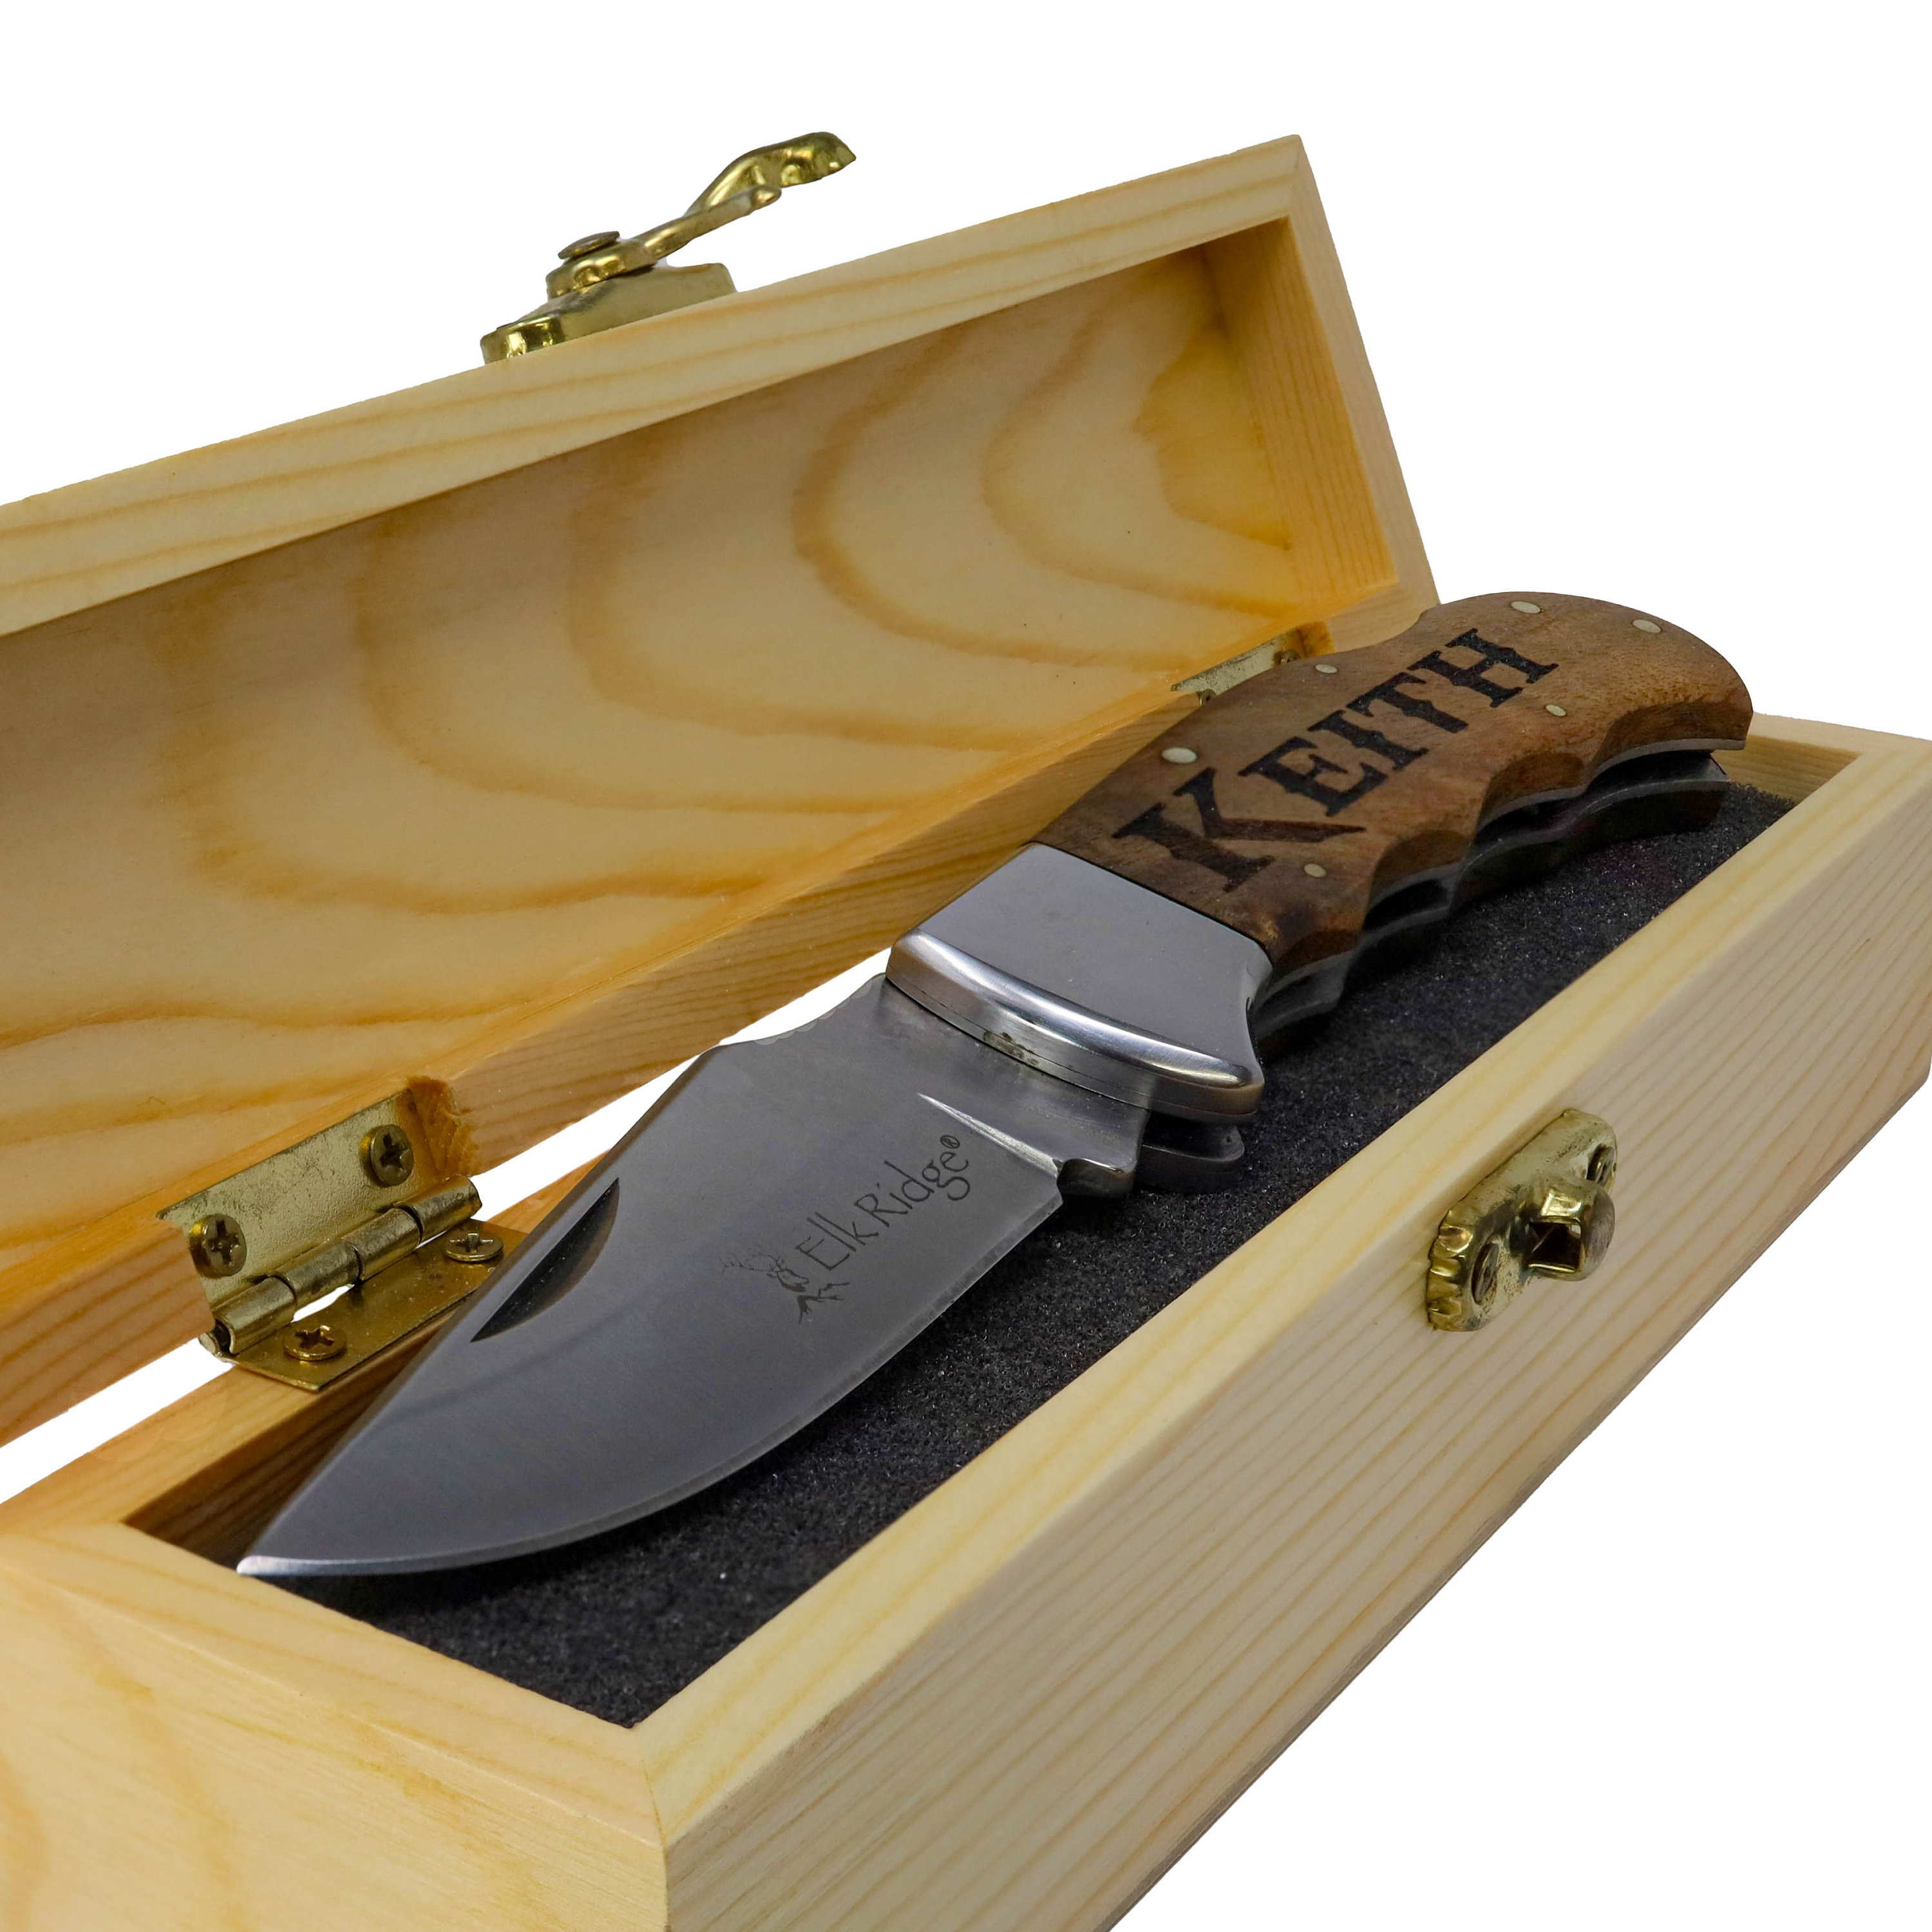 Personalized Men's Anniversary Gift  Pocket Knife and Gift Box – Brass  Honcho